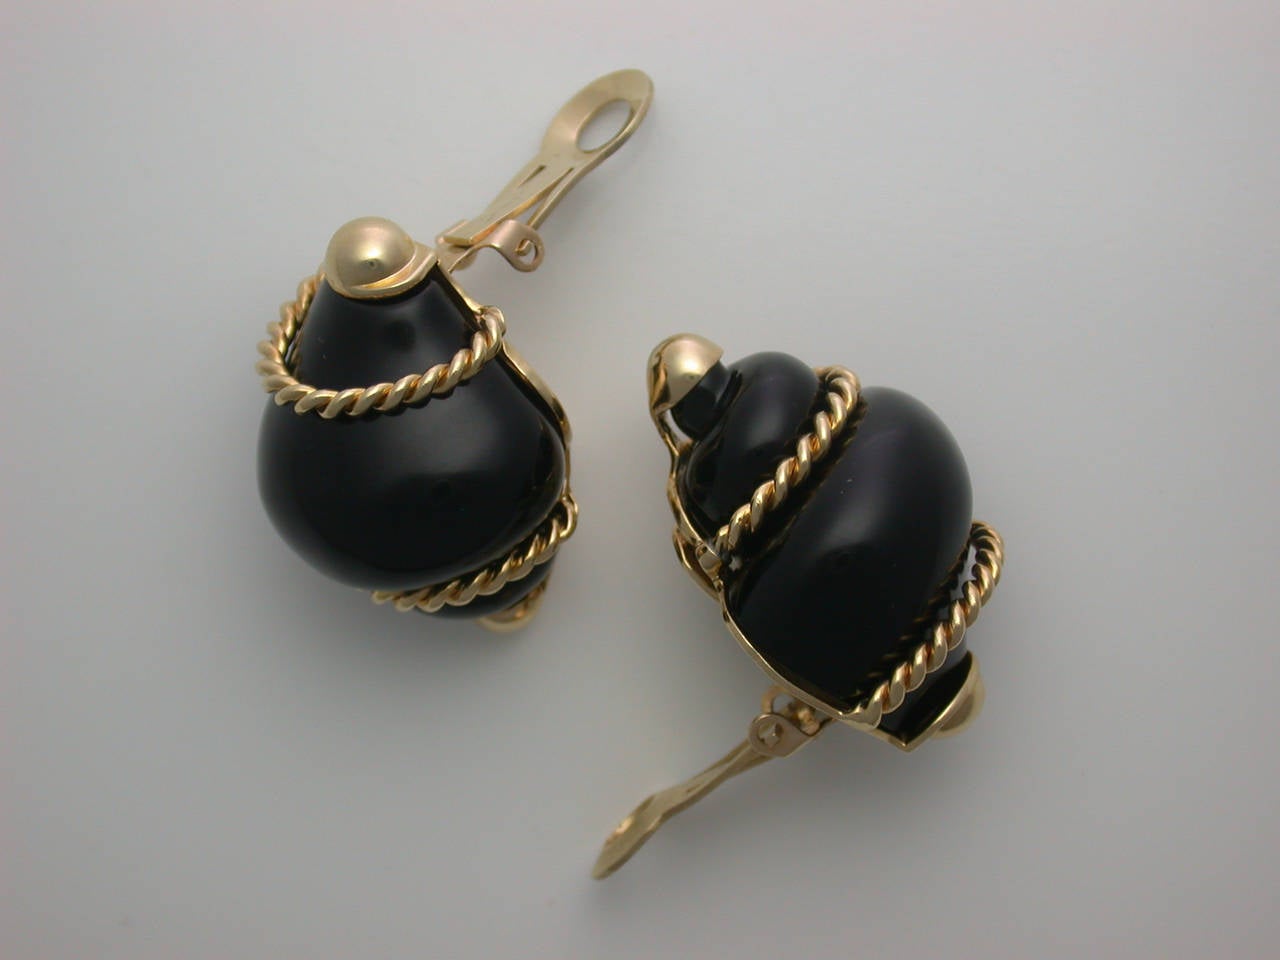 Realistically designed as three-dimensional turbo shells in carved black onyx, wrapped with gold rope and set at the terminals with polished gold caps, well-made with a 